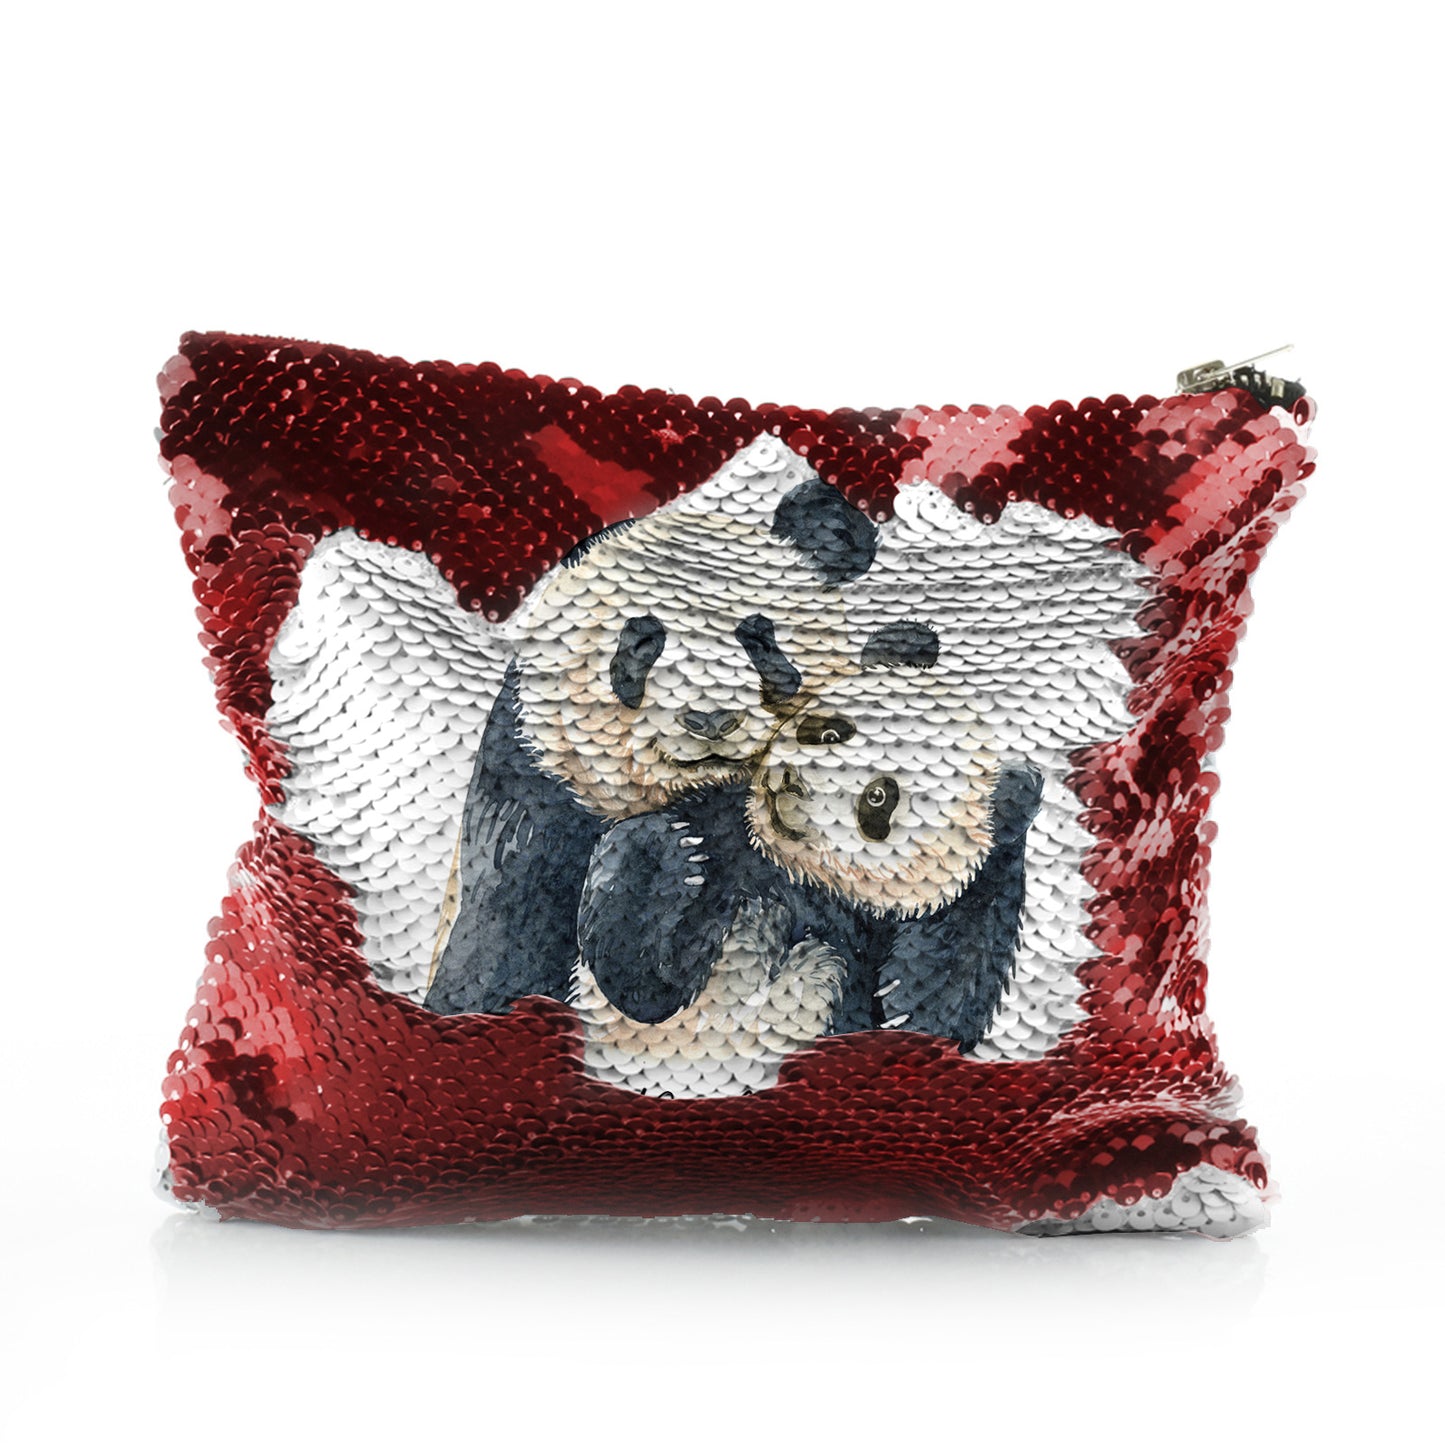 Personalised Sequin Zip Bag with Welcoming Text and Embracing Mum and Baby Pandas